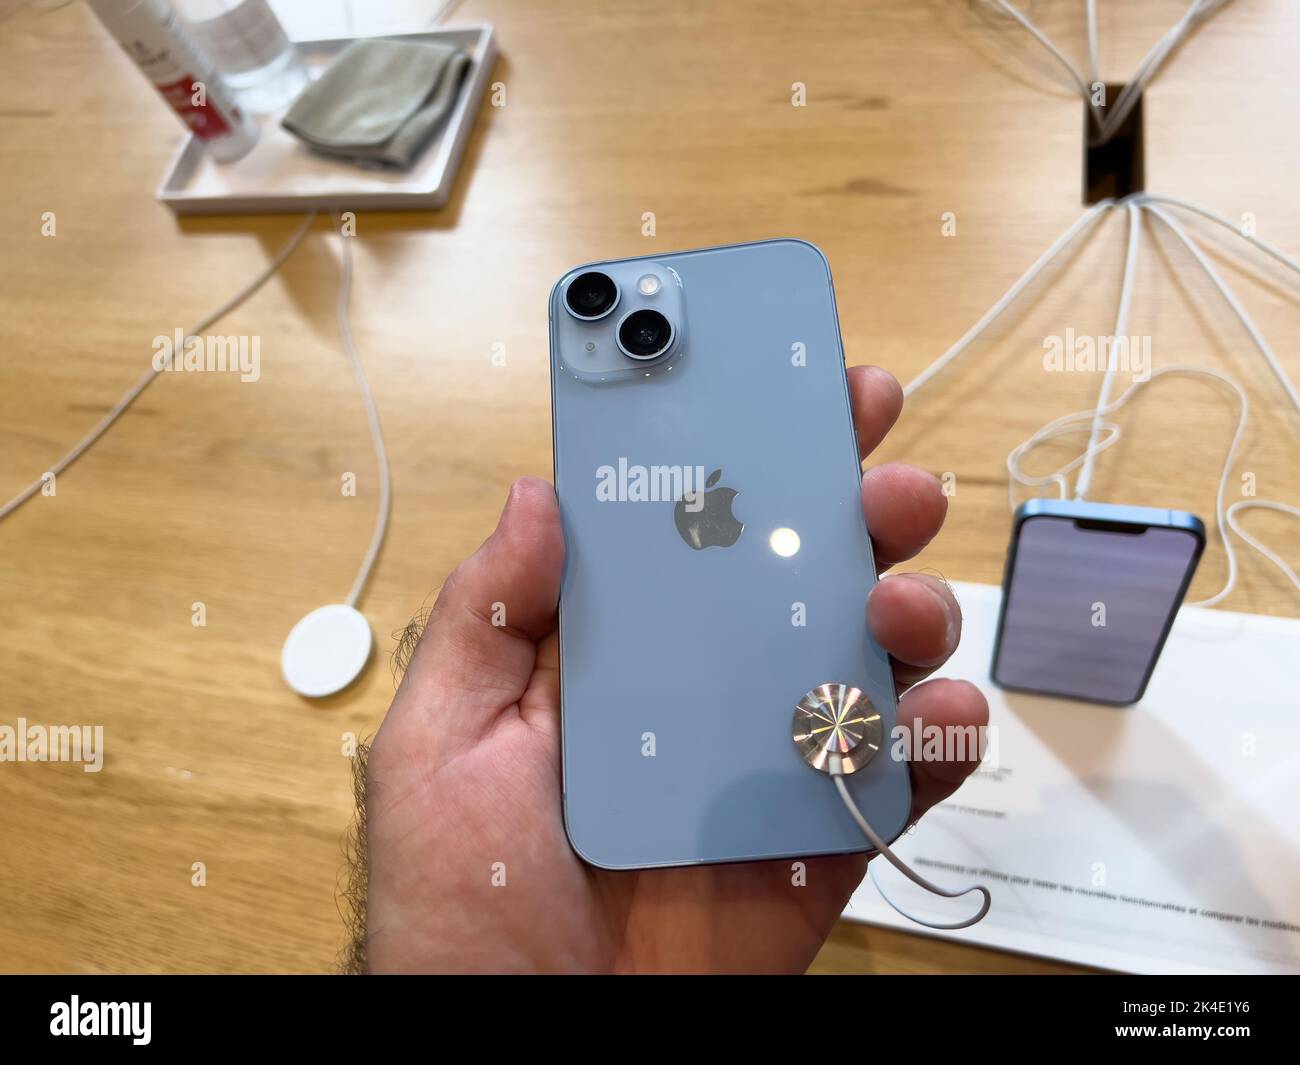 Paris, France - Sep 16, 2022: Customer holding new sky blue colored Apple Computers iPhone 14 during the launch day featuring new dual powerful camera car crash detection and satellite SOS Stock Photo